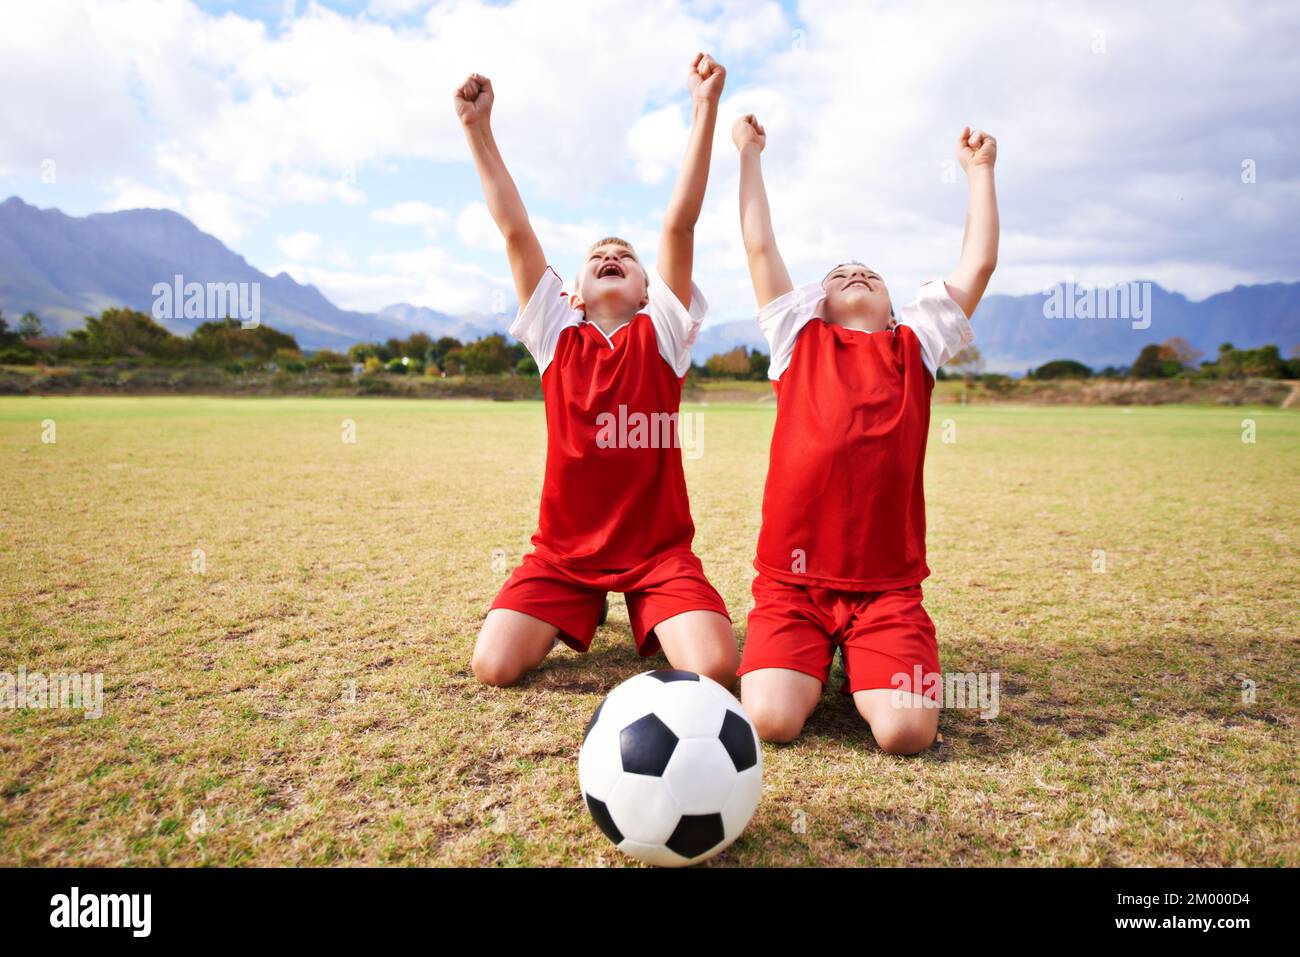 Practicing their goal-scoring celebrations. Full length shot of two kids celebrating on a soccer field. Stock Photo